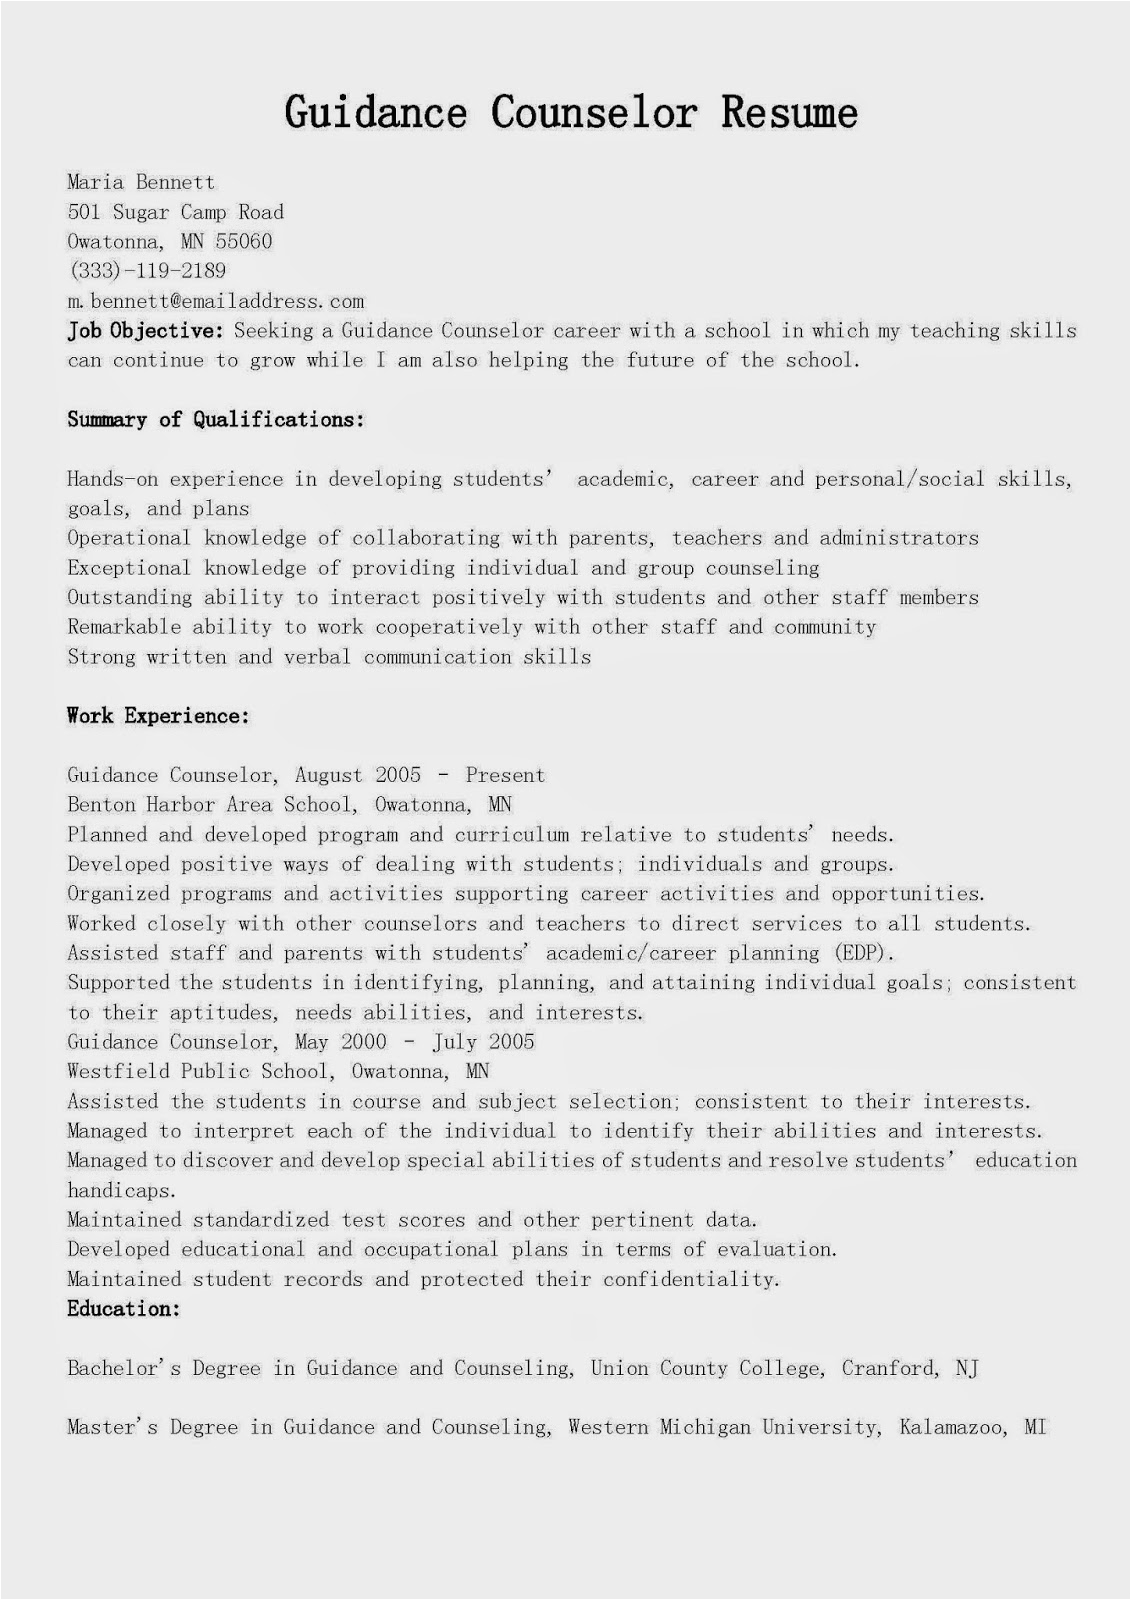 Resume Samples for Seeking Counselor Recommendation Resume Samples Guidance Counselor Resume Sample